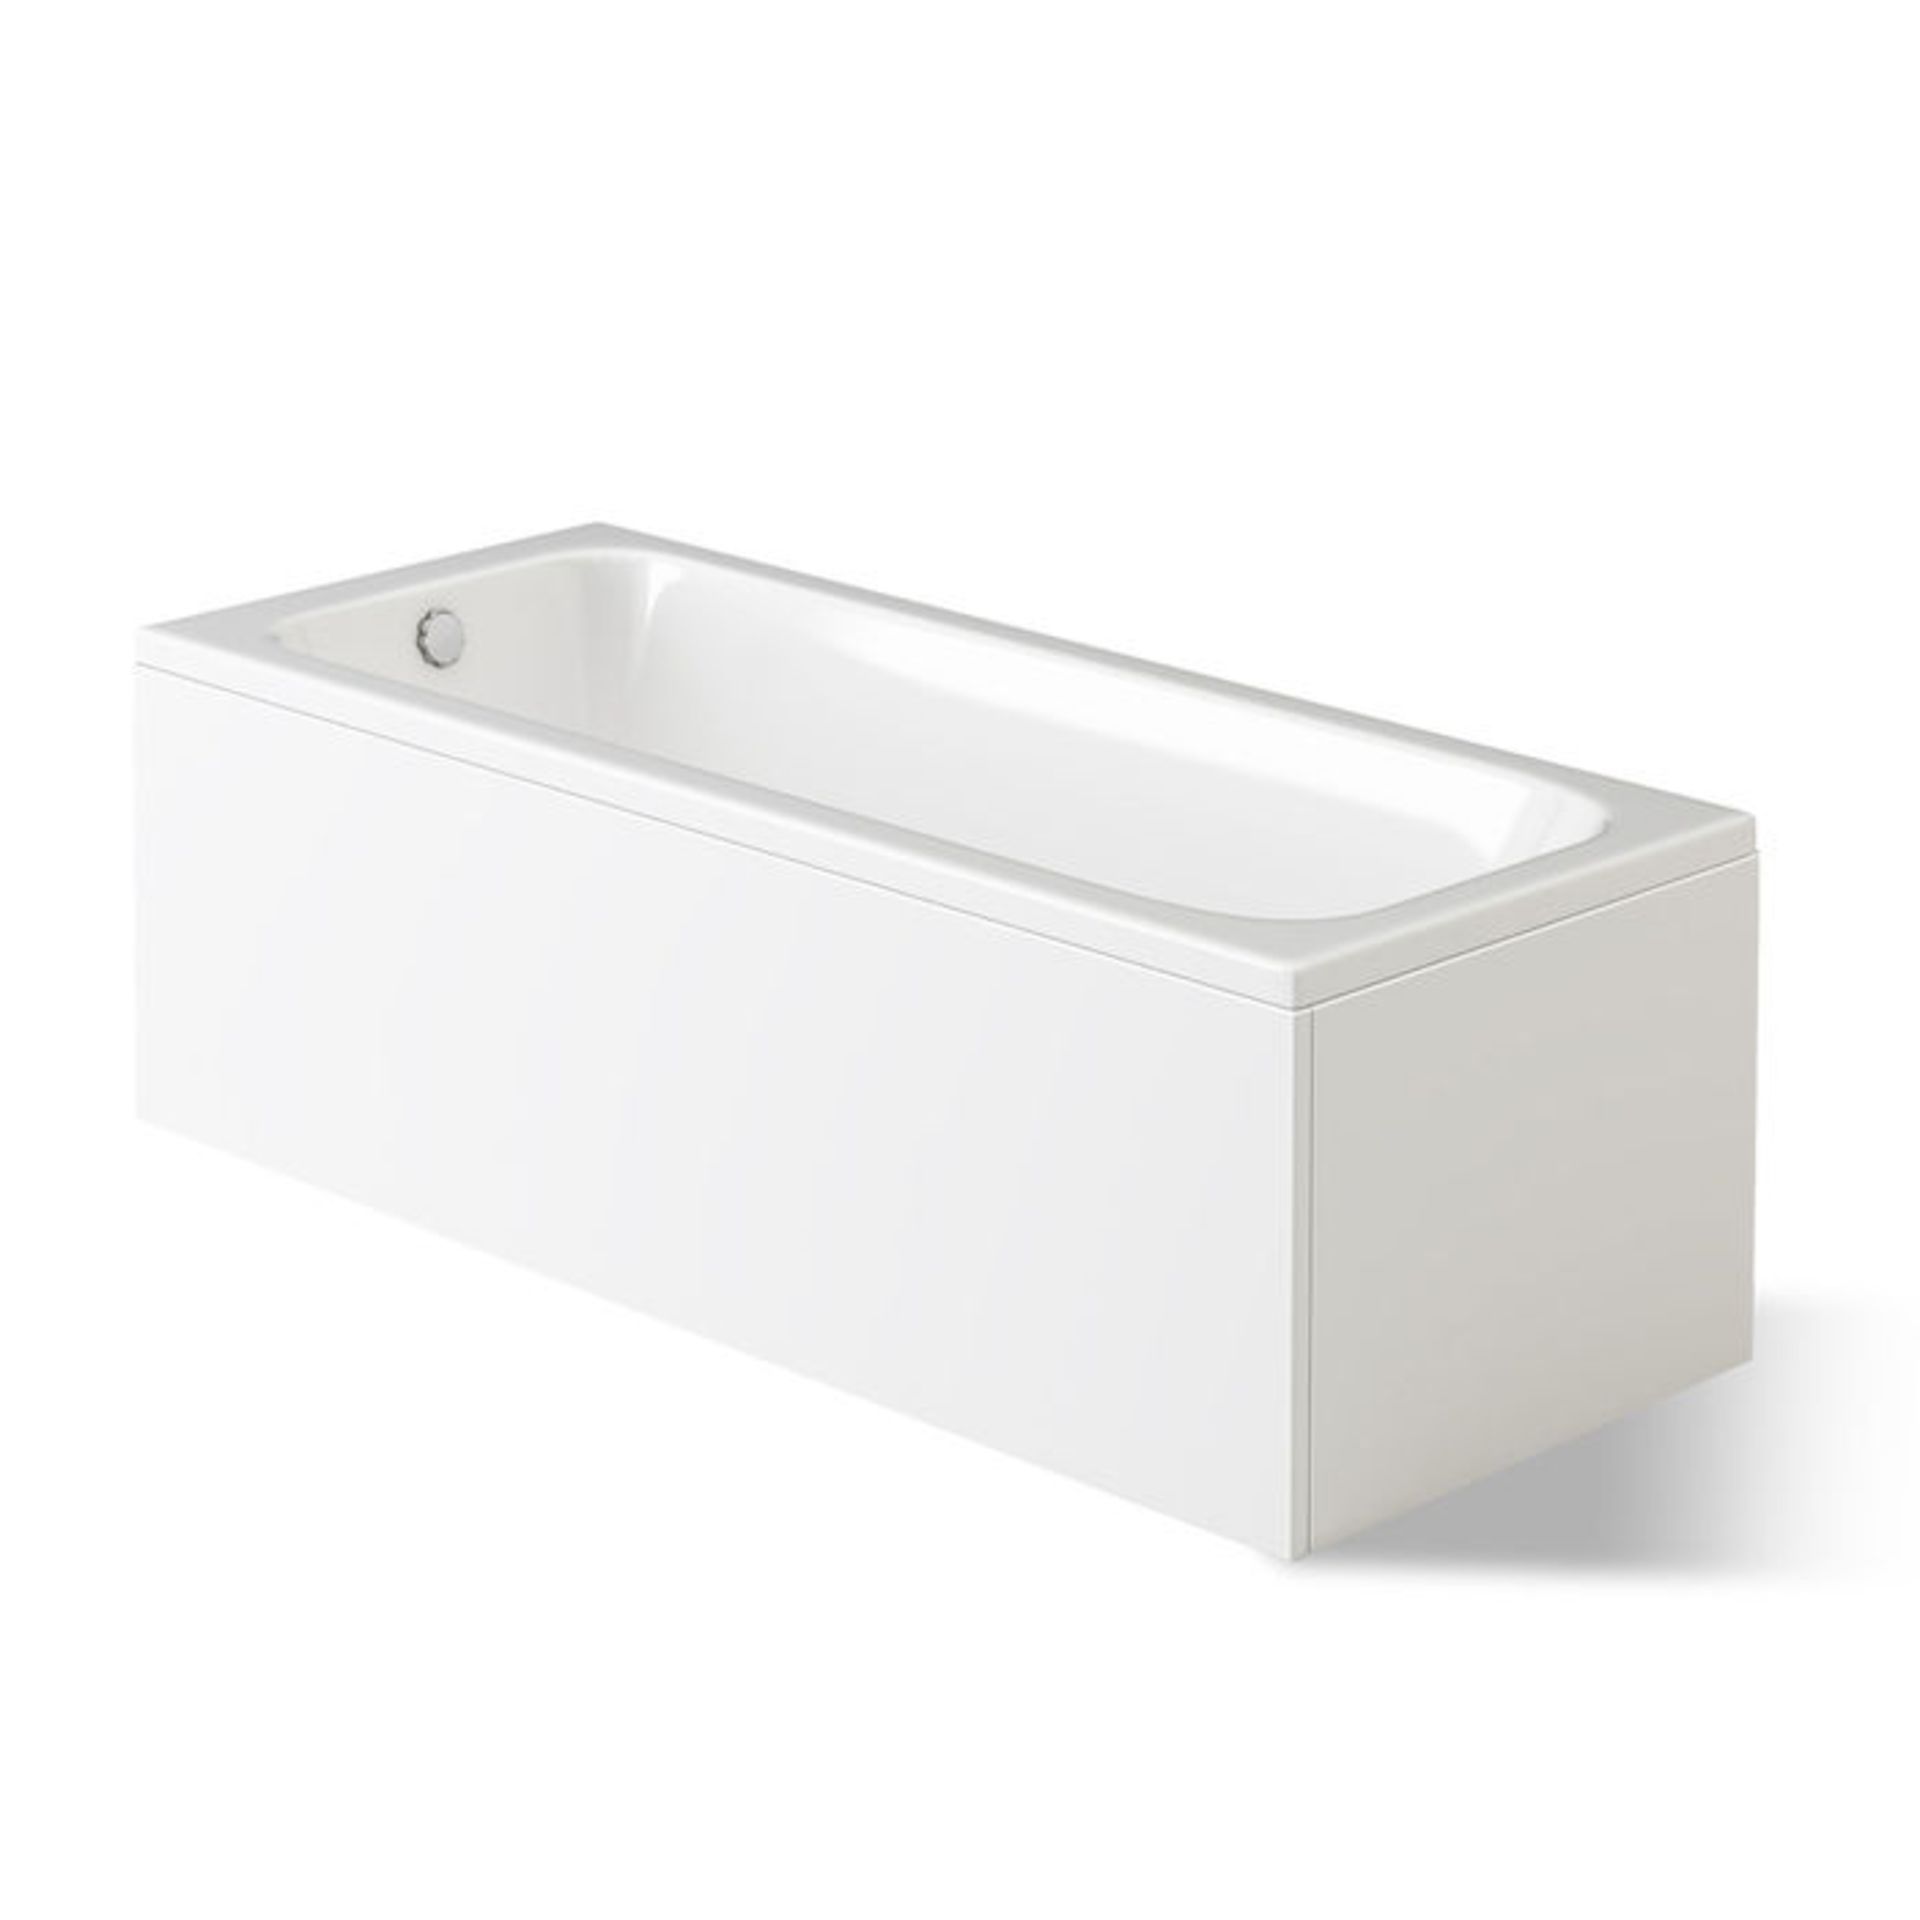 (XX66) 1700x700x390mm Round Single Ended Bath with Panel. COMES COMPLETE WITH SIDE PANEL. RRP ?... - Image 3 of 3